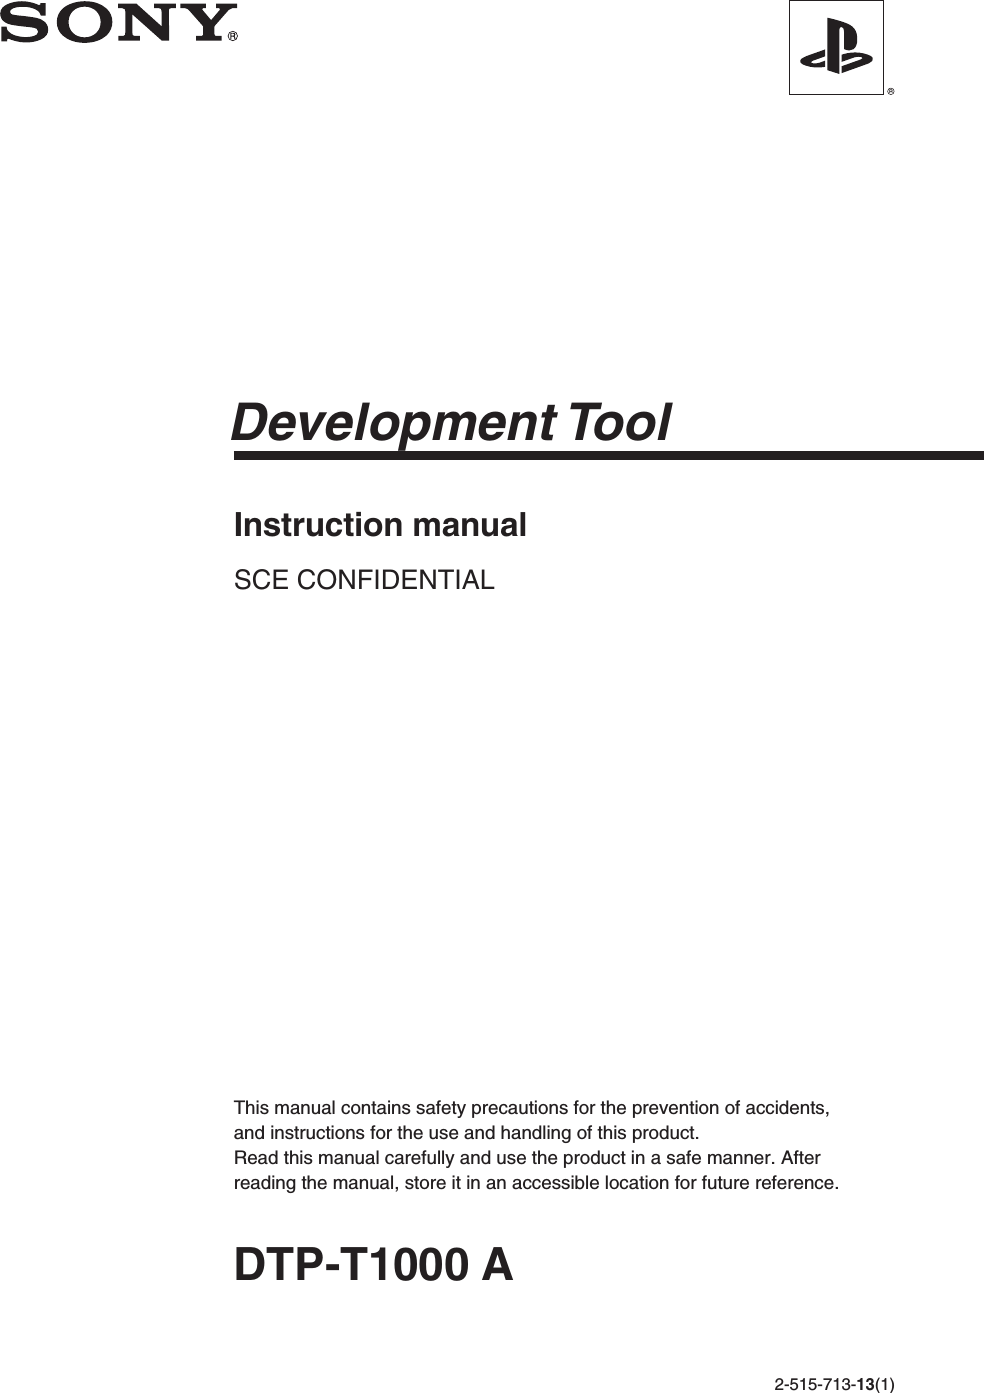 Instruction manualSCE CONFIDENTIALDTP-T1000 ADevelopment ToolThis manual contains safety precautions for the prevention of accidents,and instructions for the use and handling of this product.Read this manual carefully and use the product in a safe manner. Afterreading the manual, store it in an accessible location for future reference.2-515-713-13(1)